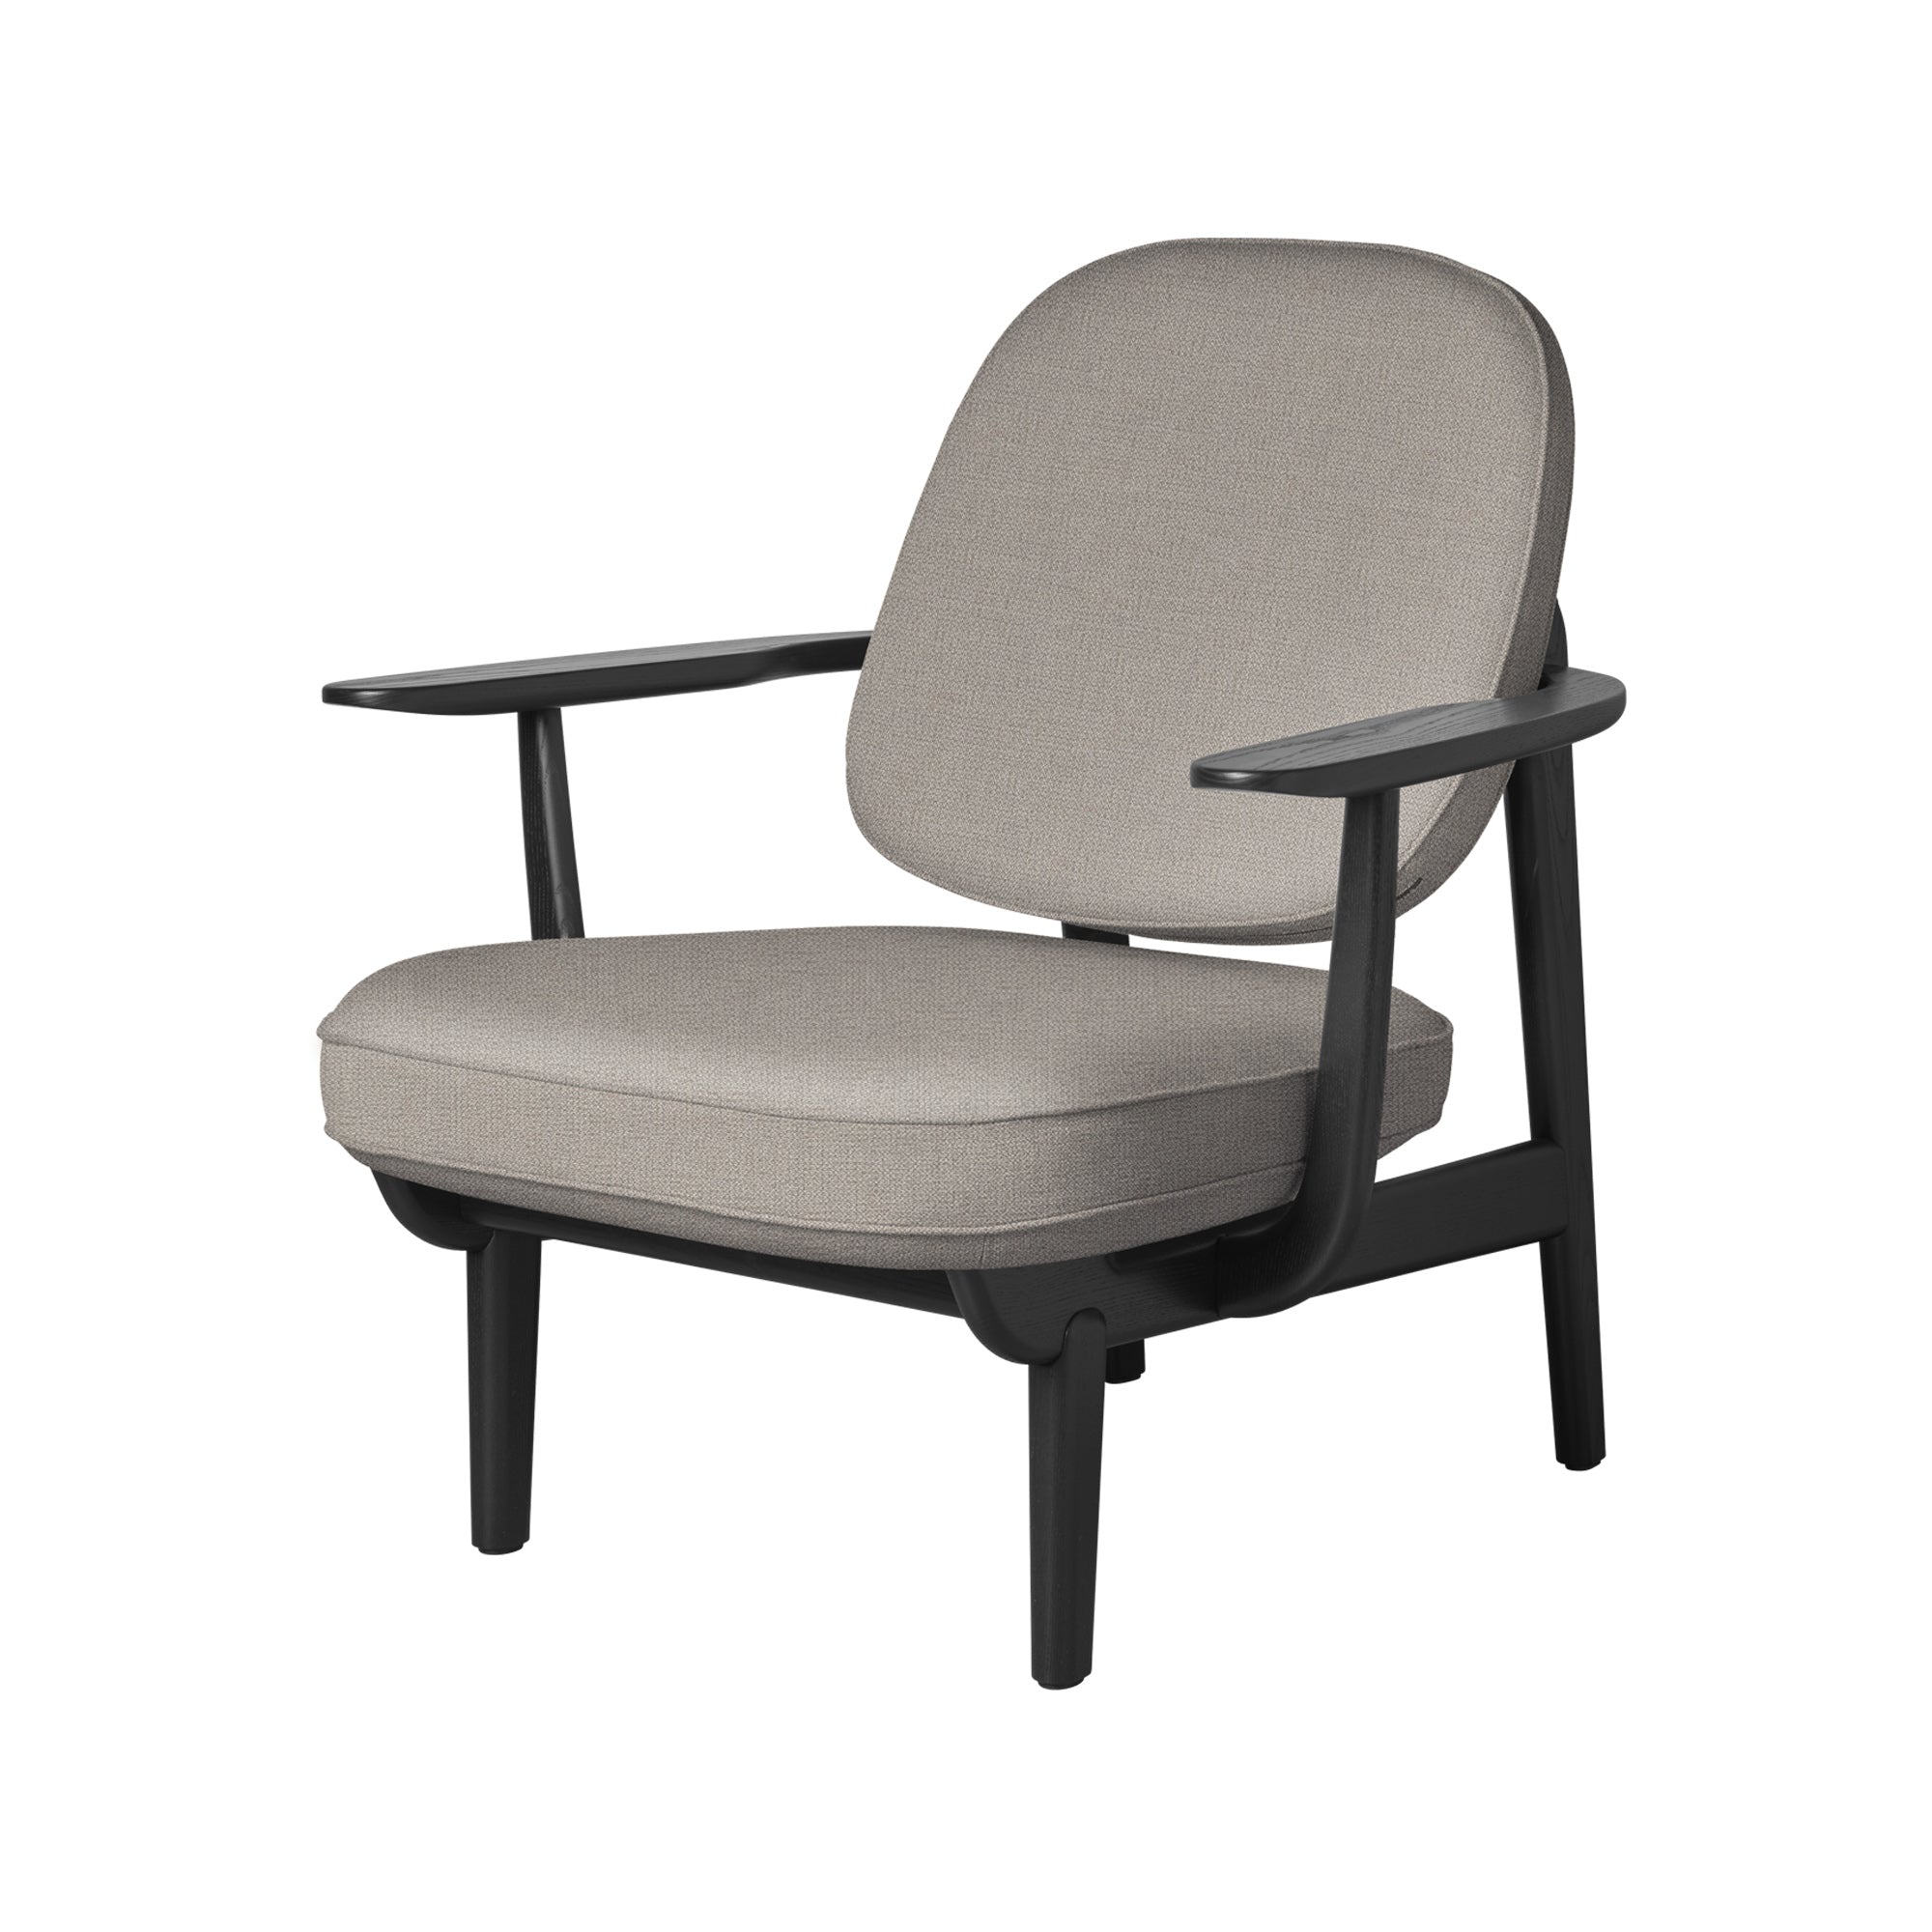 Fred Lounge Chair